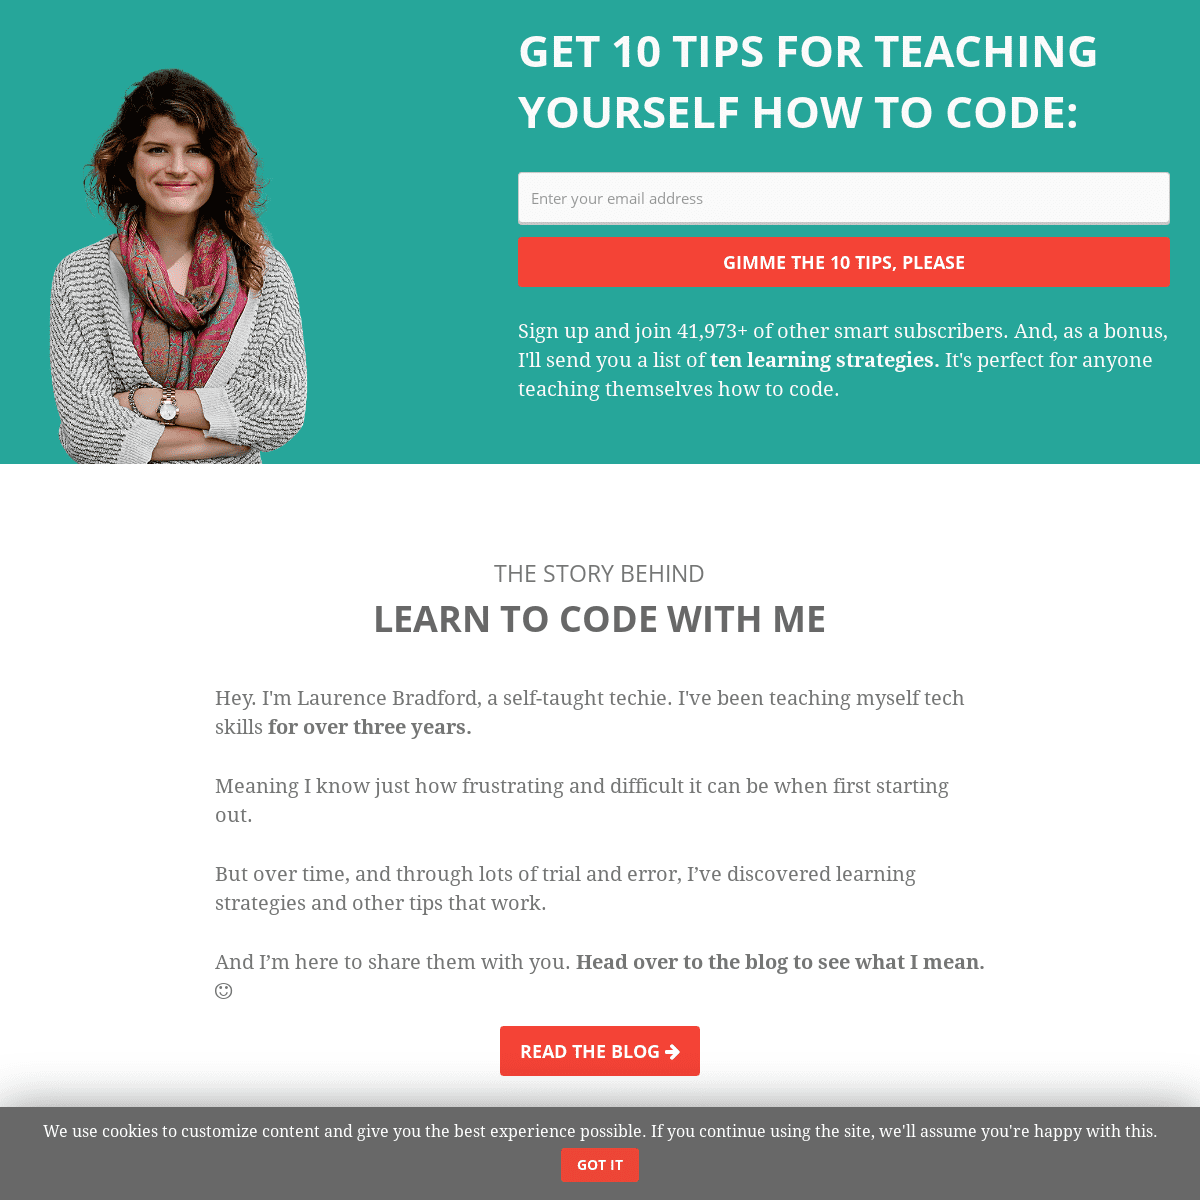 A complete backup of learntocodewith.me